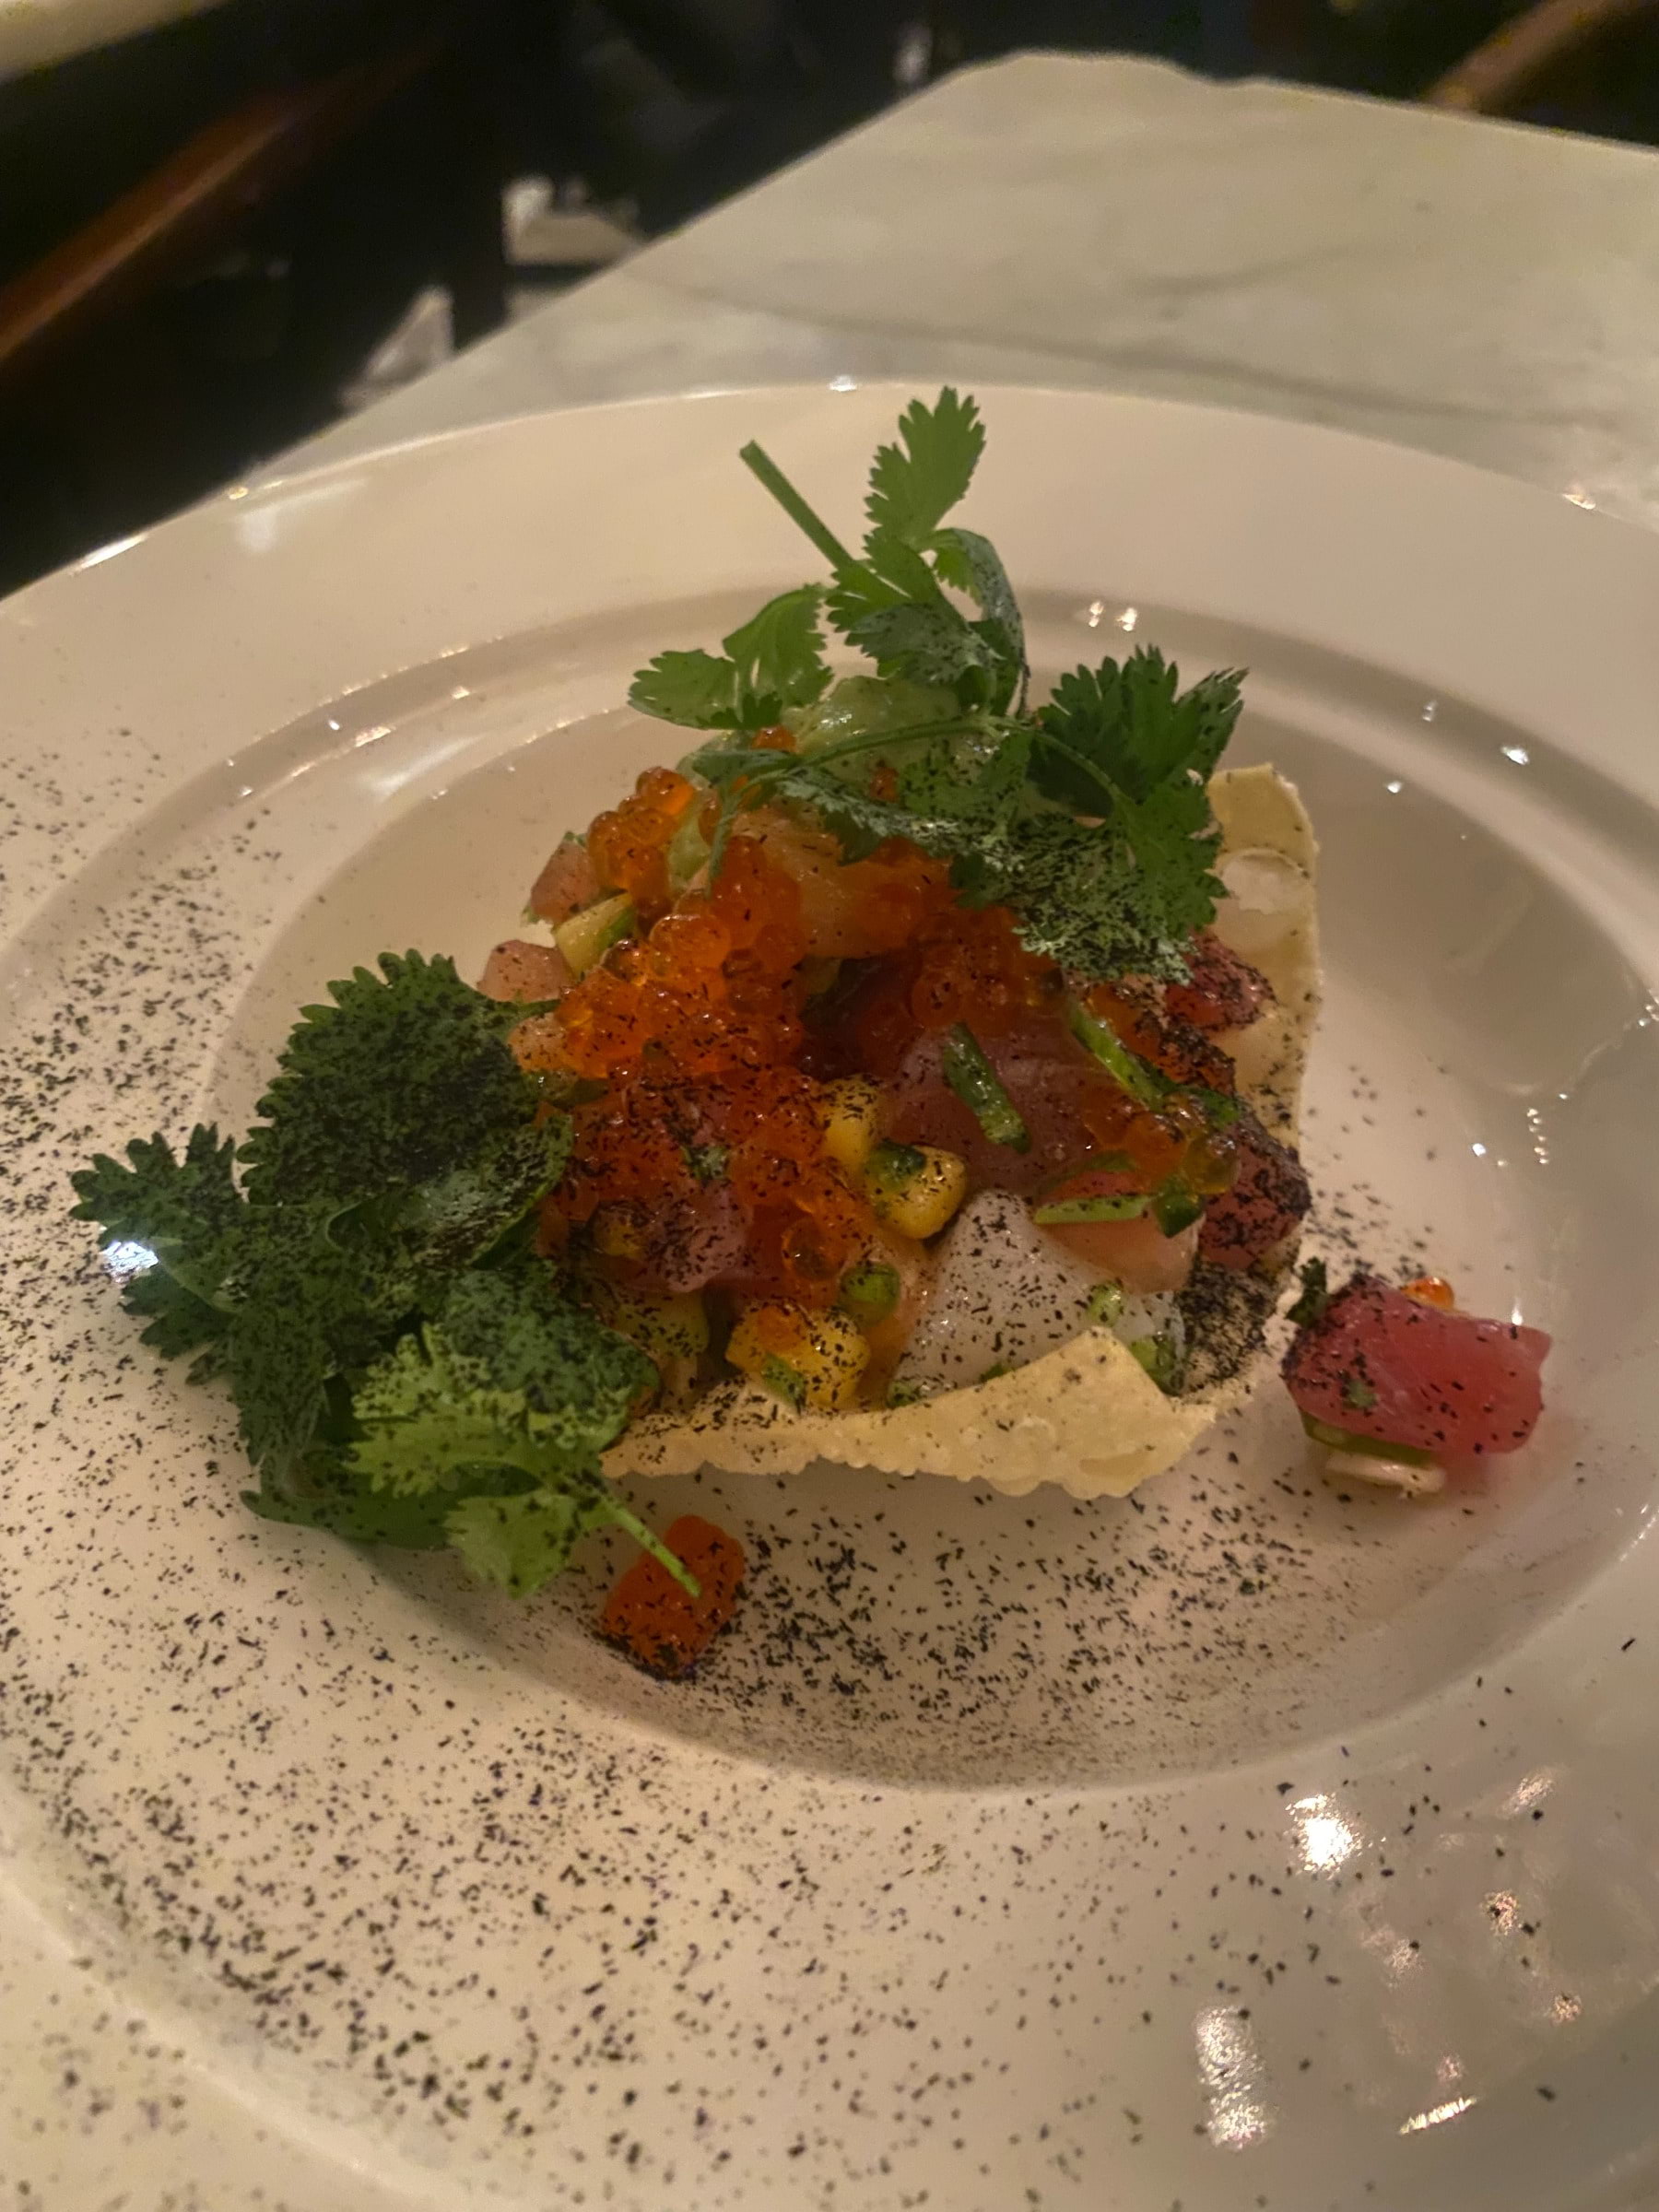 Laxtartar – Photo from PA & Co by Adam L. (31/10/2021)